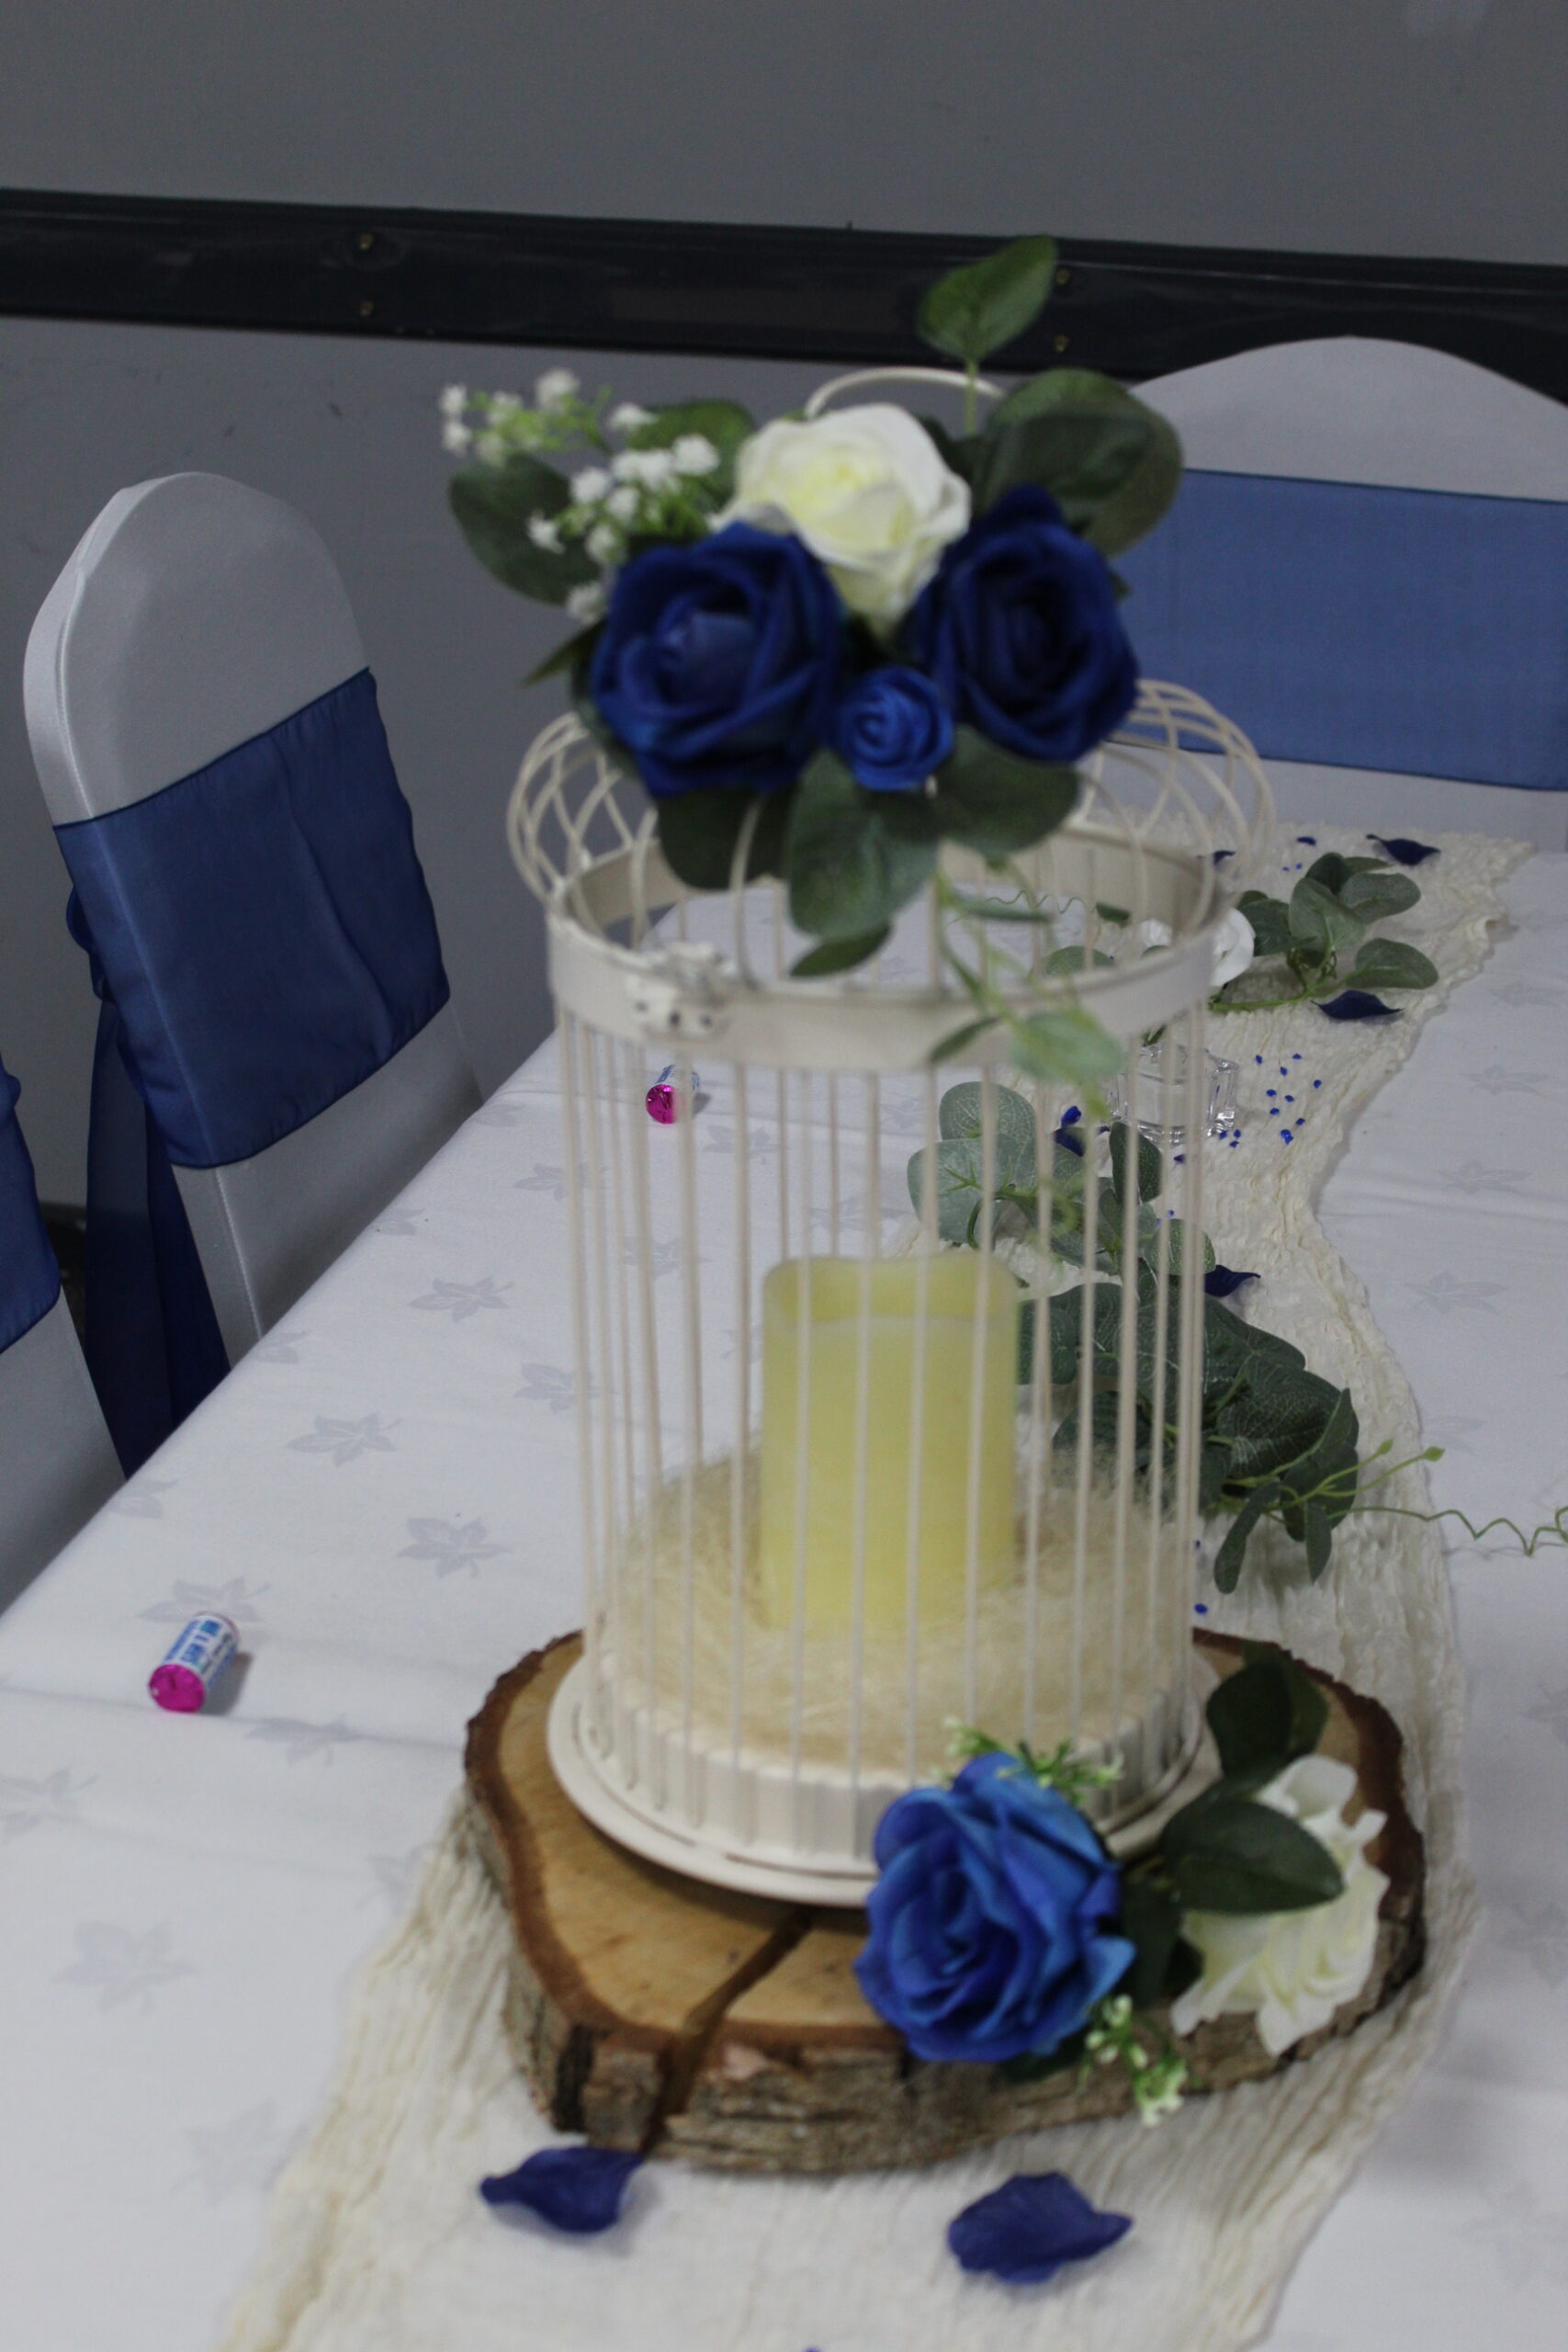 Bird cage centrepiece with candle and blue roses